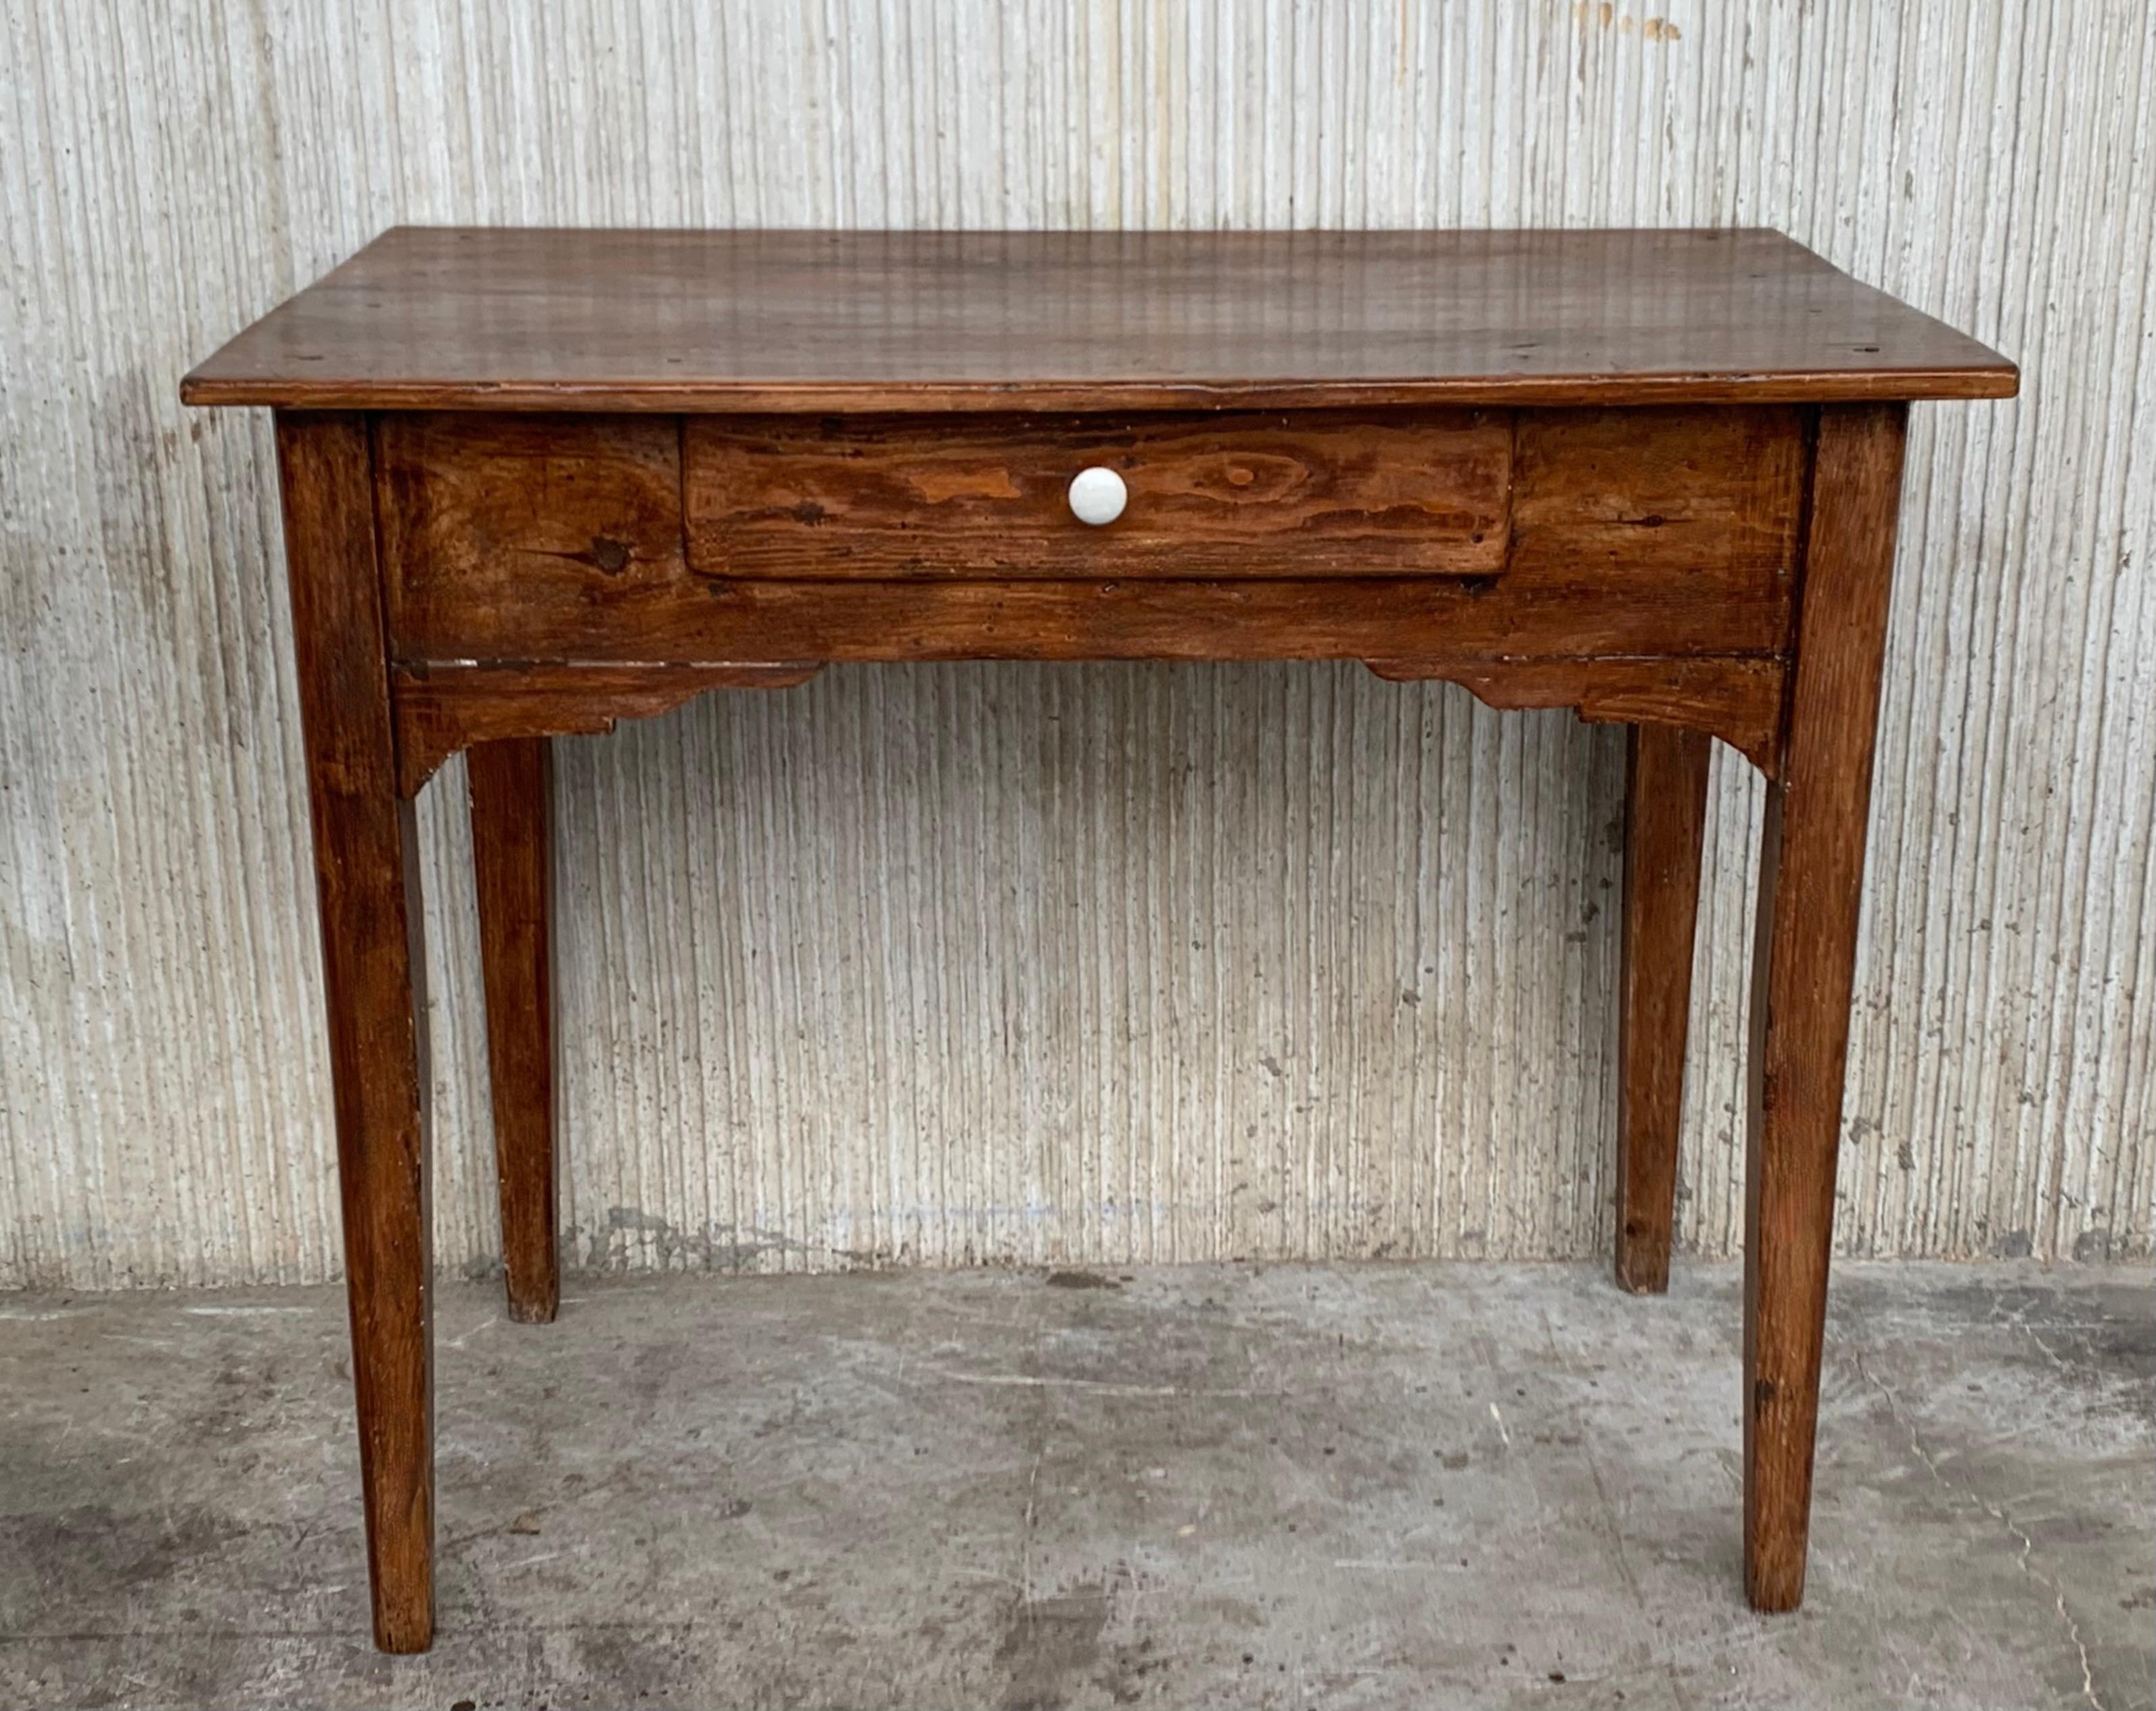 A charming early 20th century Spanish pine farm table with four tapered legs and a wonderfully well-worn finish from a century of use. Table works well for dining, but can also be used as a desk.

Height from the floor to the drawers. 24.80in.